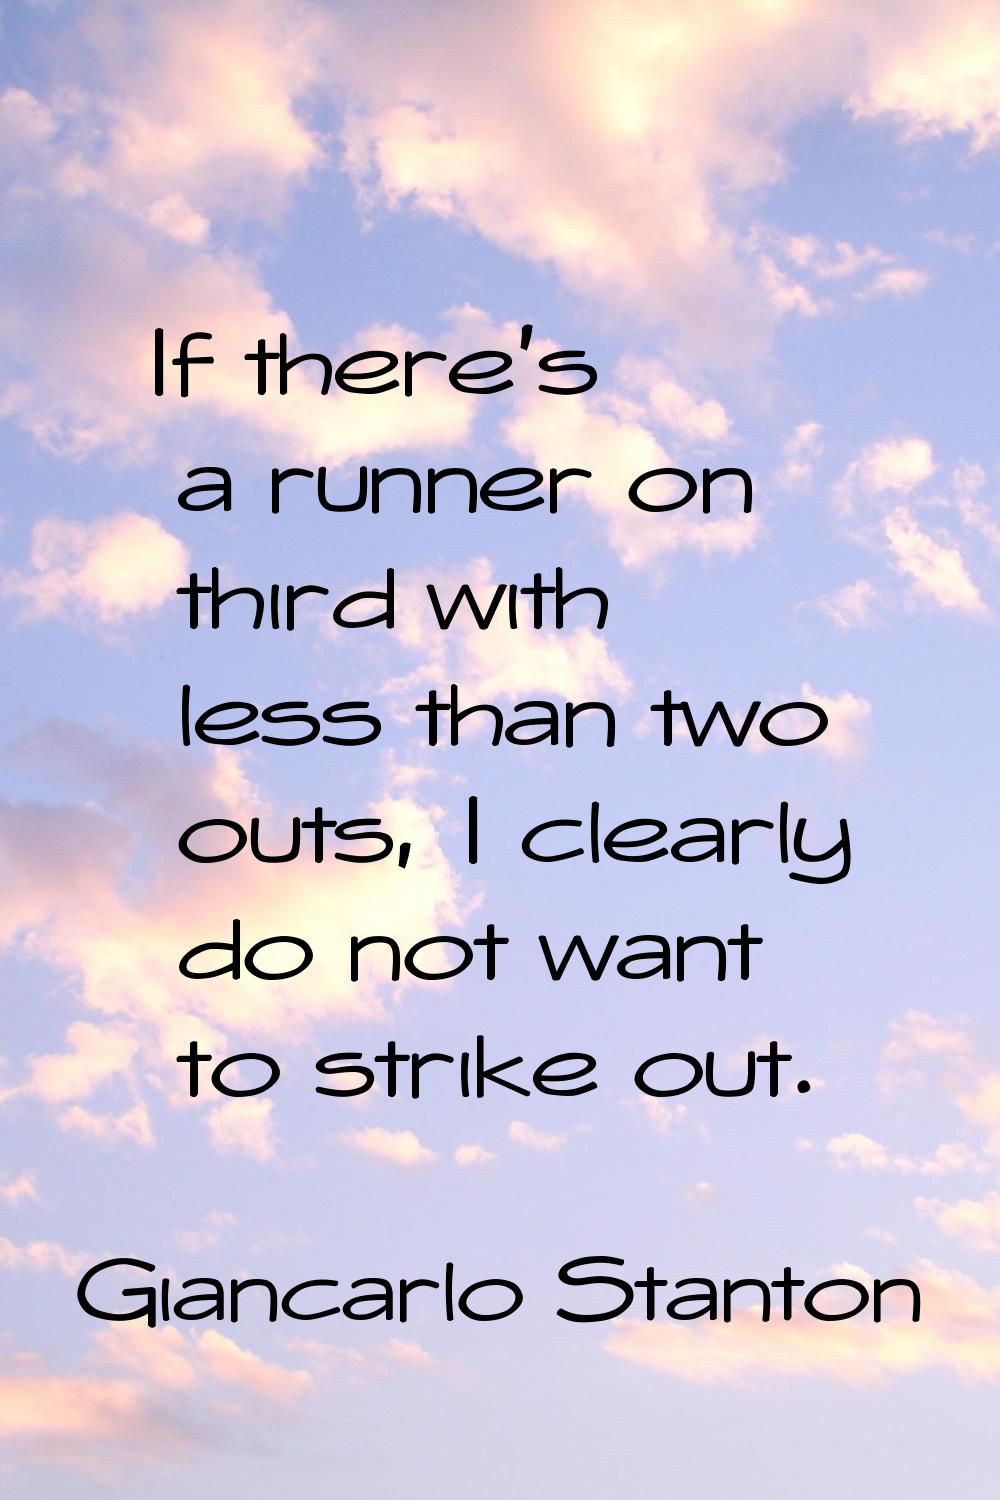 If there's a runner on third with less than two outs, I clearly do not want to strike out.